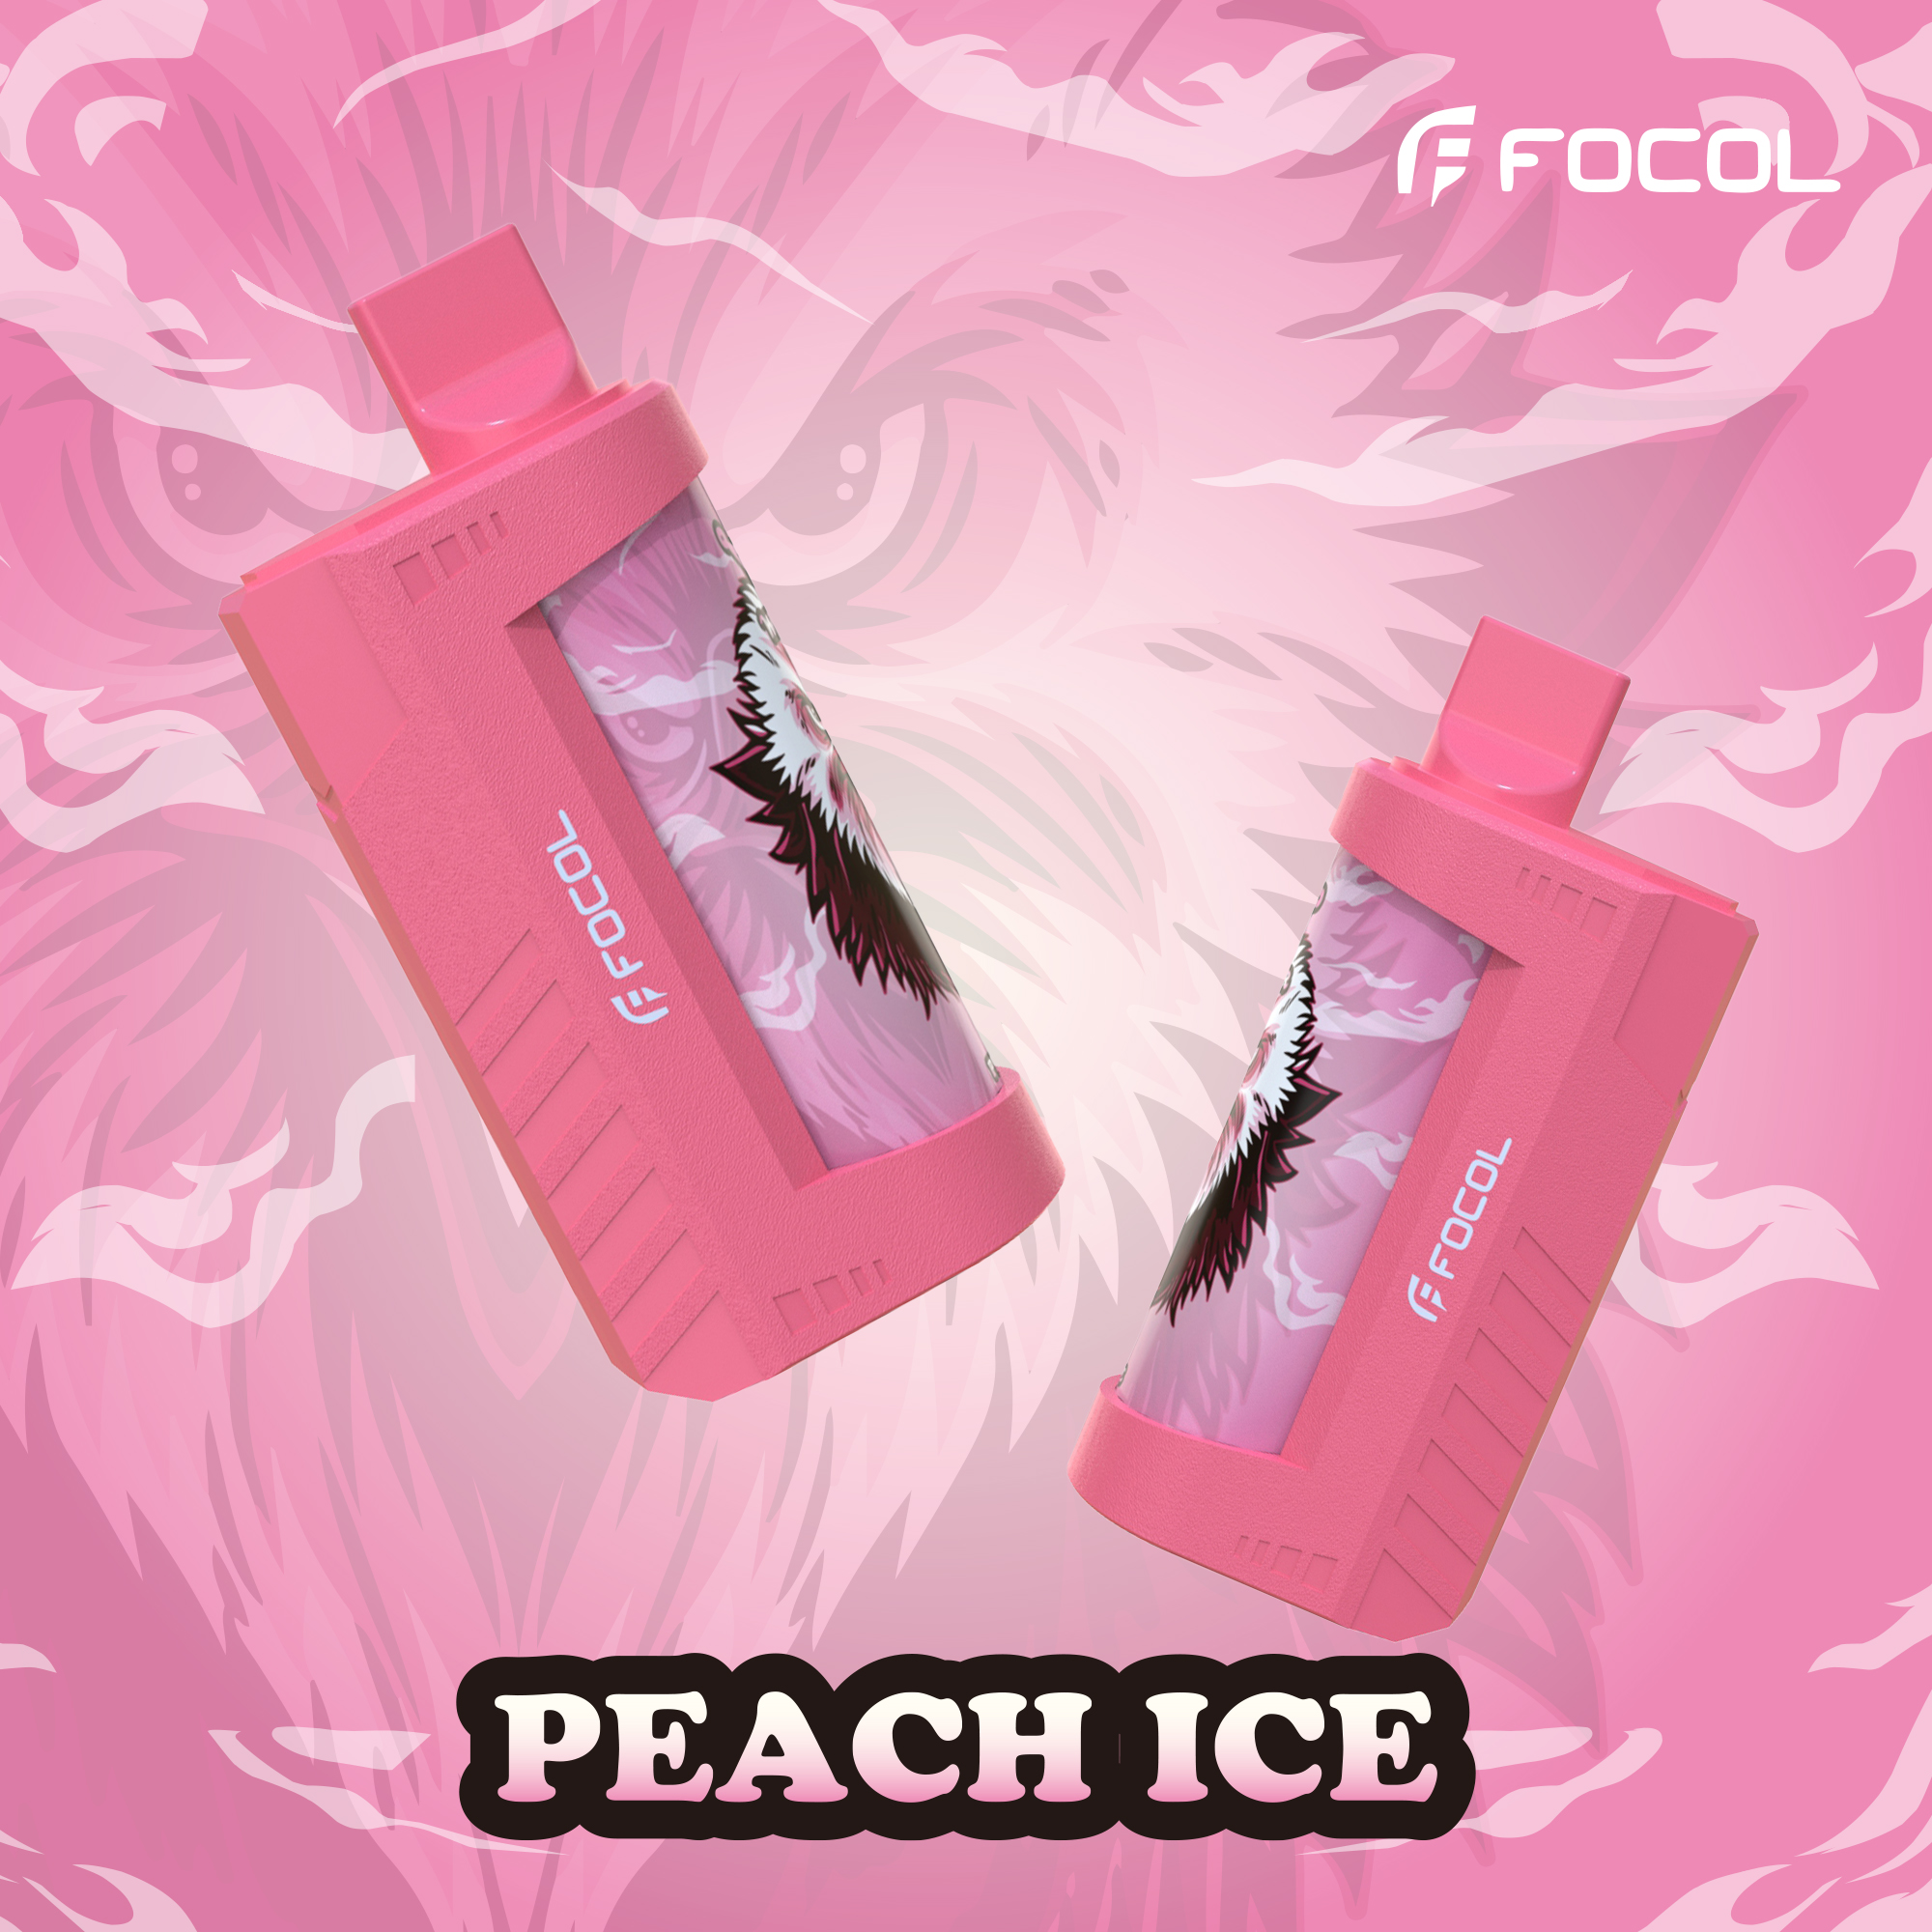 Focol Official Site Best Nicotine Disposable Vape Brand